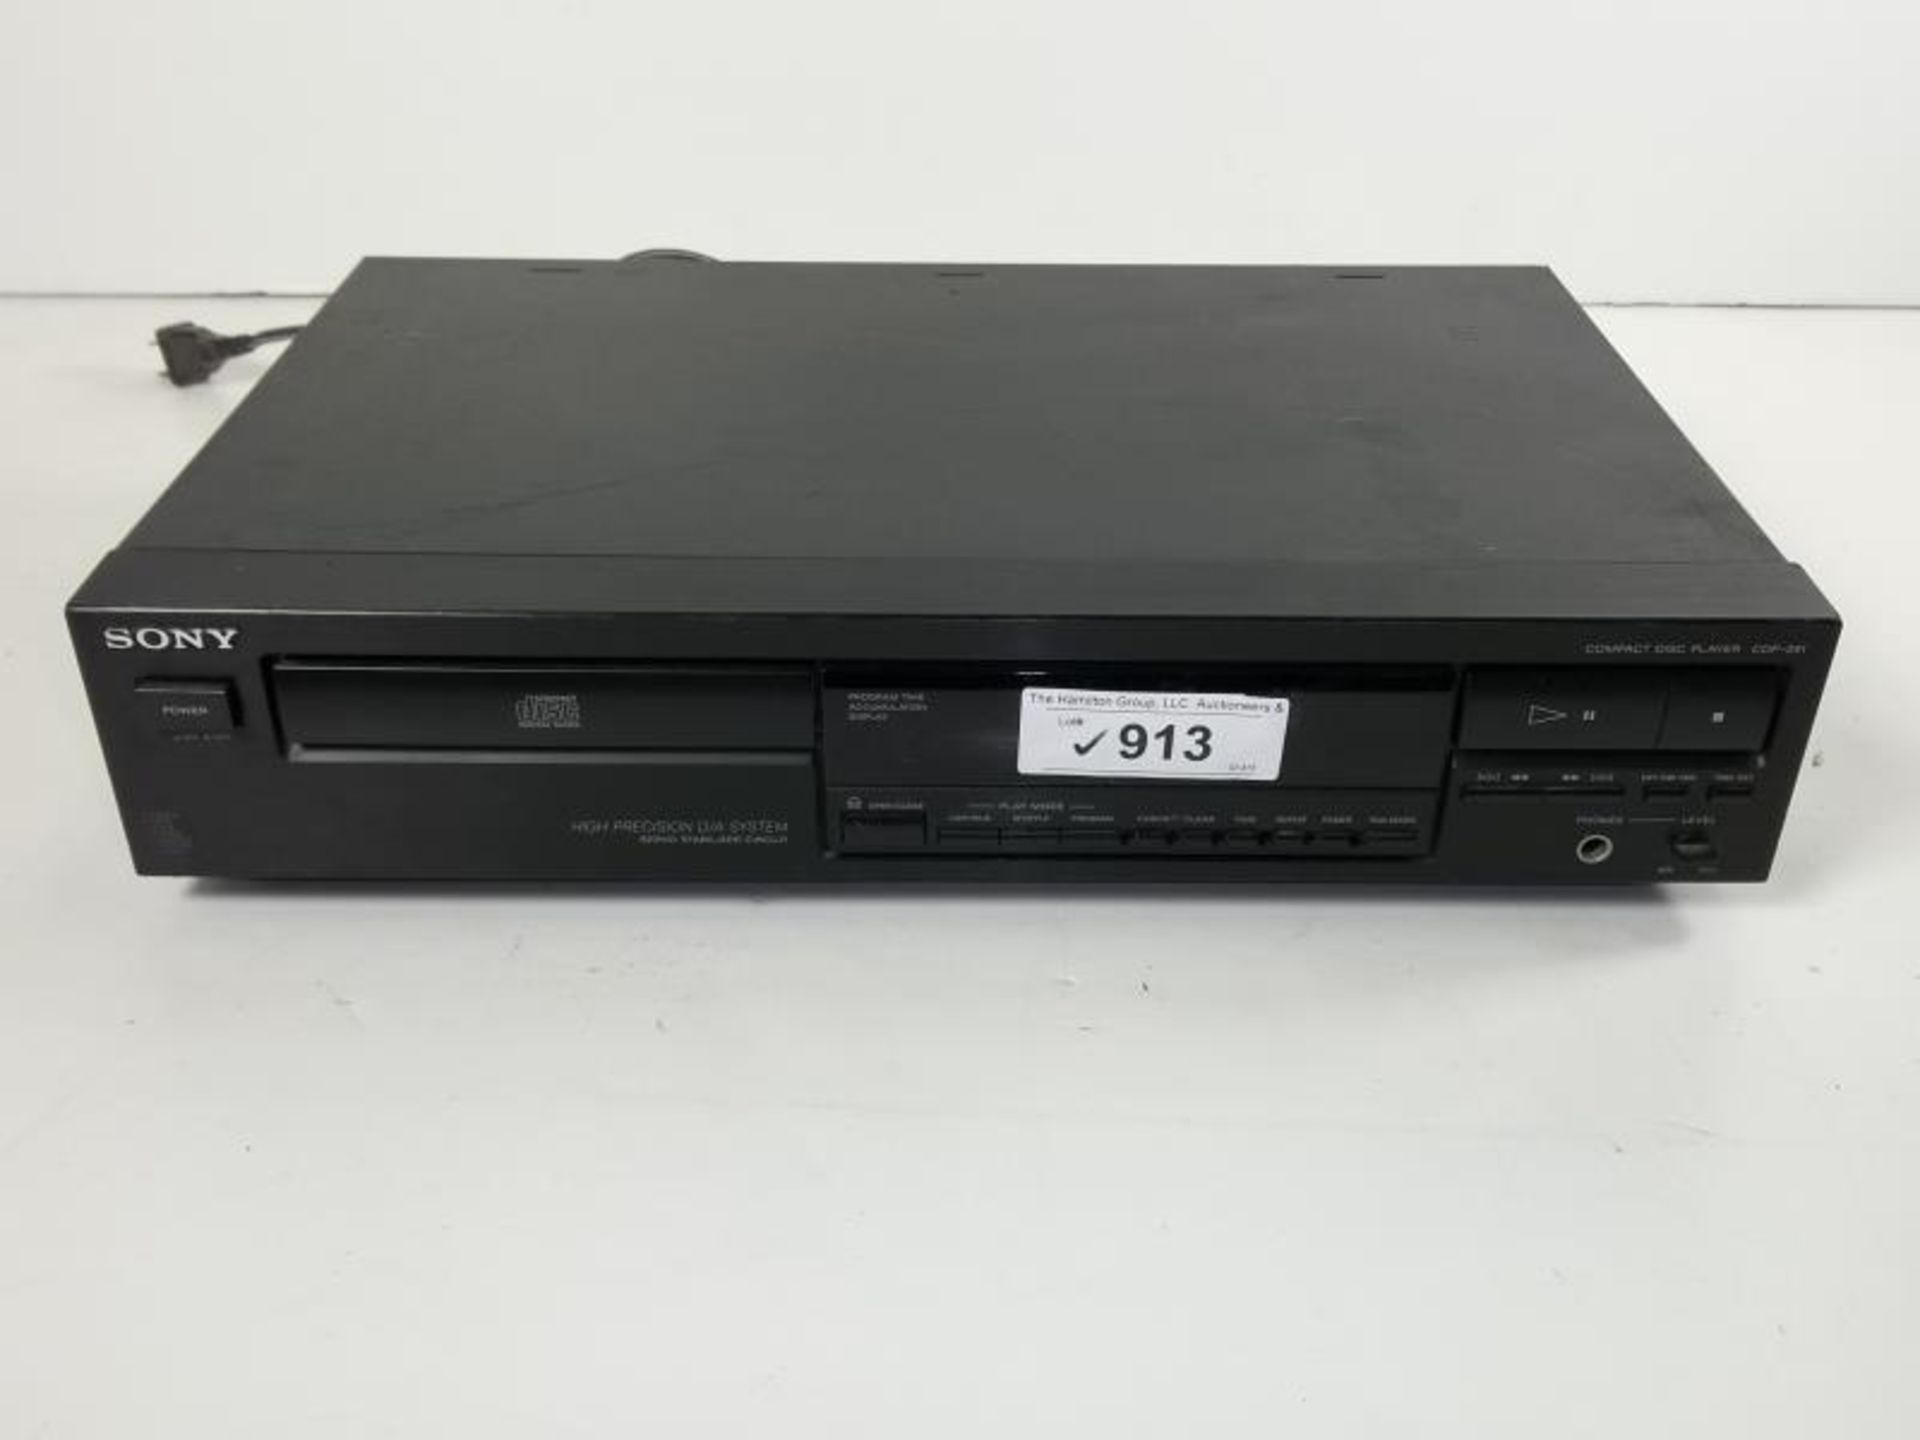 Sony compact disc player CDP-291, 1991, tested - powers up